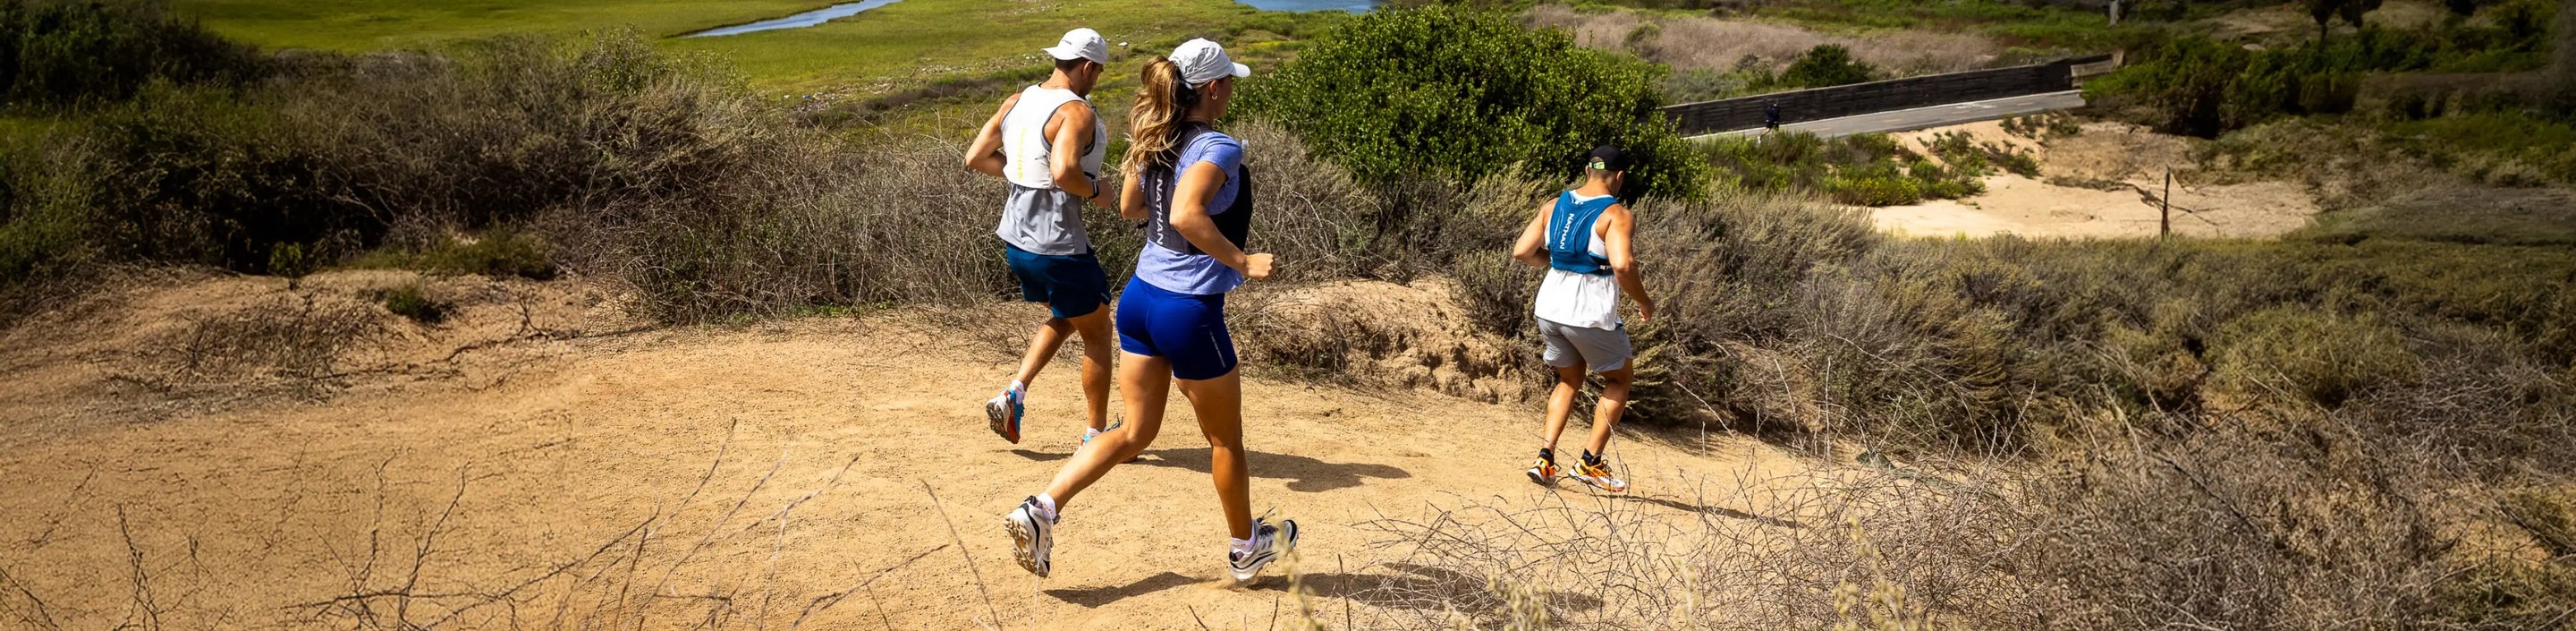 three trail runners wearing Nathan Sports apparel and hydration packs running down a dirt hill